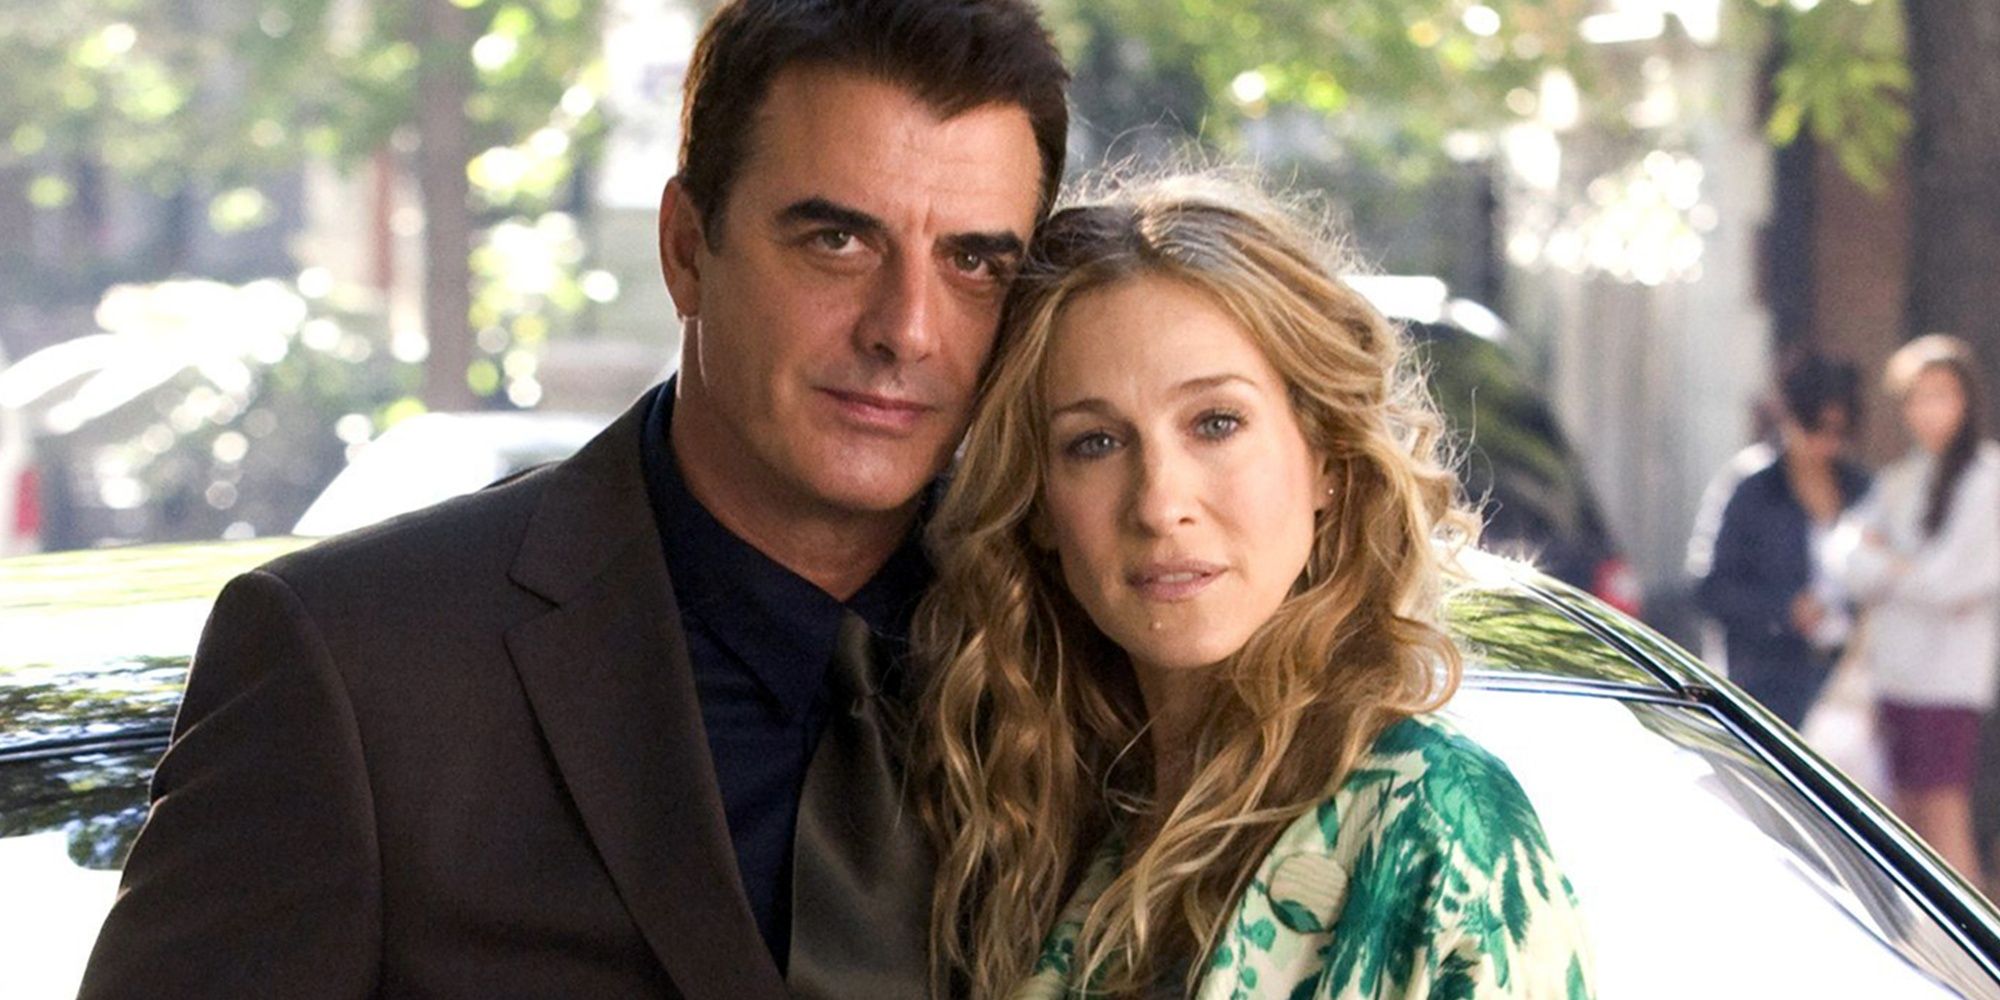 Chris Noth as Mr Big + Sarah Jessica Parker as Carrie in Sex and the City Entry 5